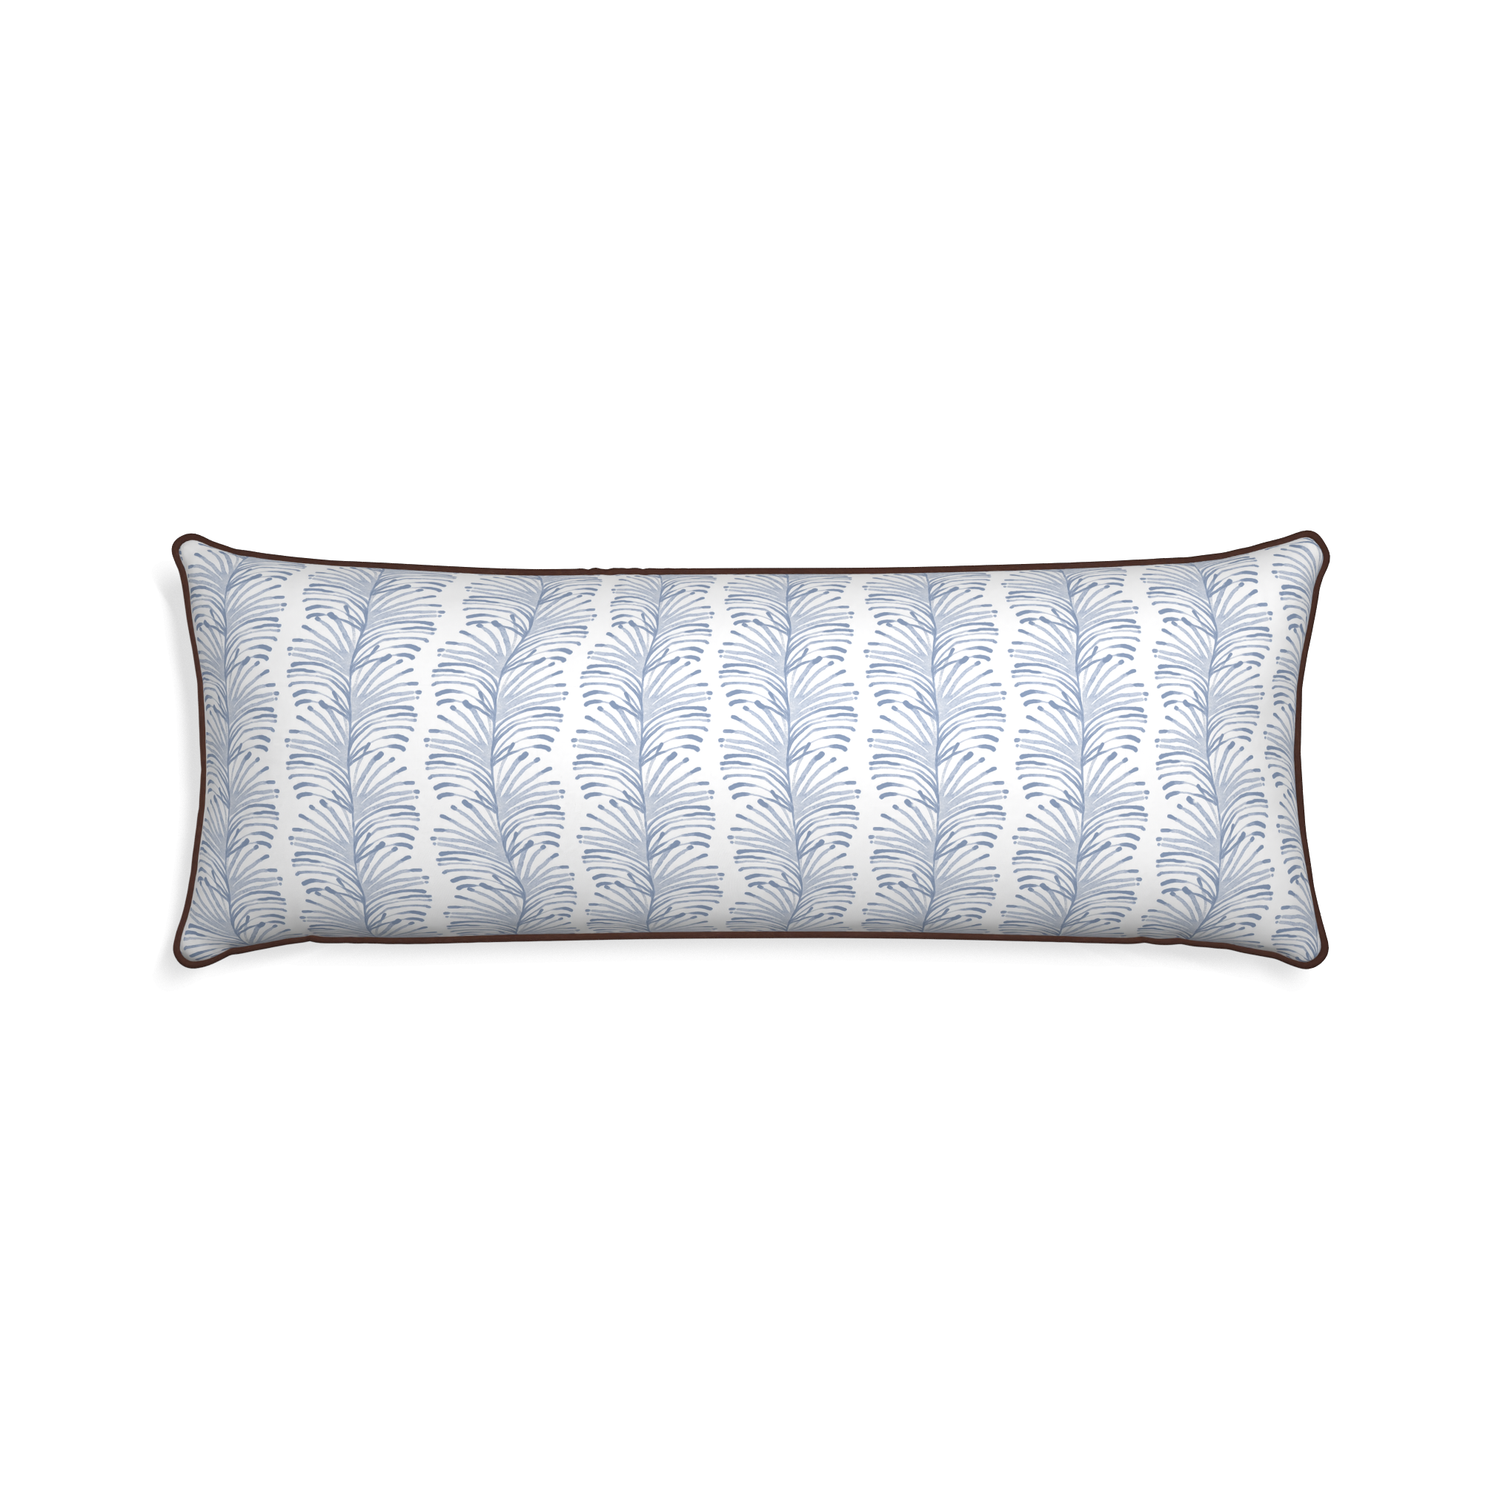 Xl-lumbar emma sky custom pillow with w piping on white background